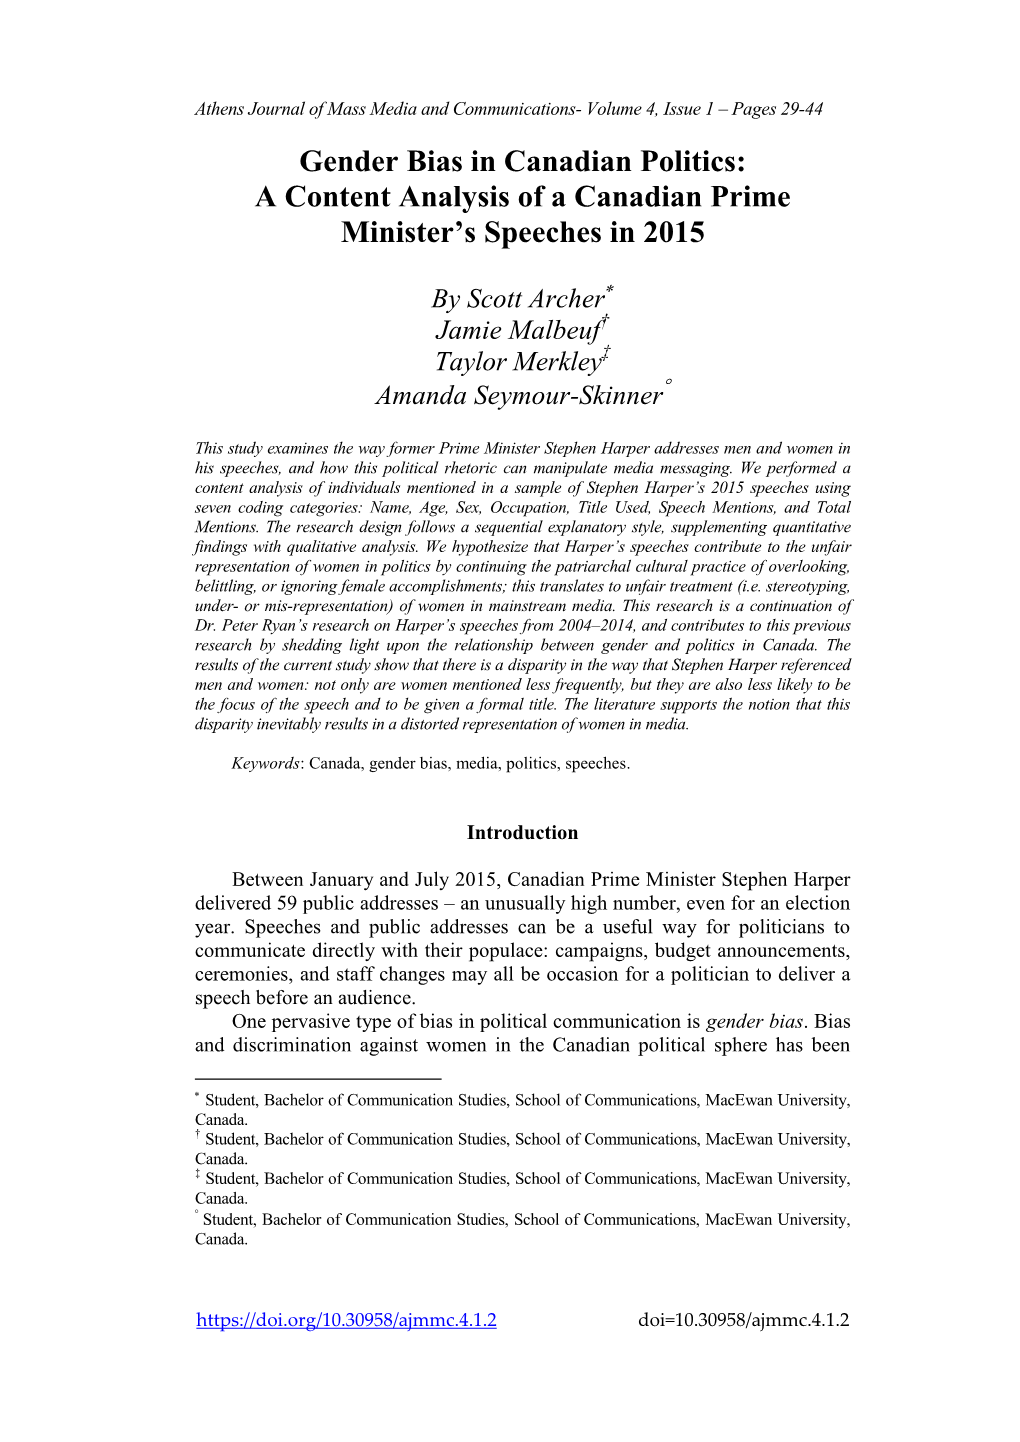 A Content Analysis of a Canadian Prime Minister's Speeches in 2015